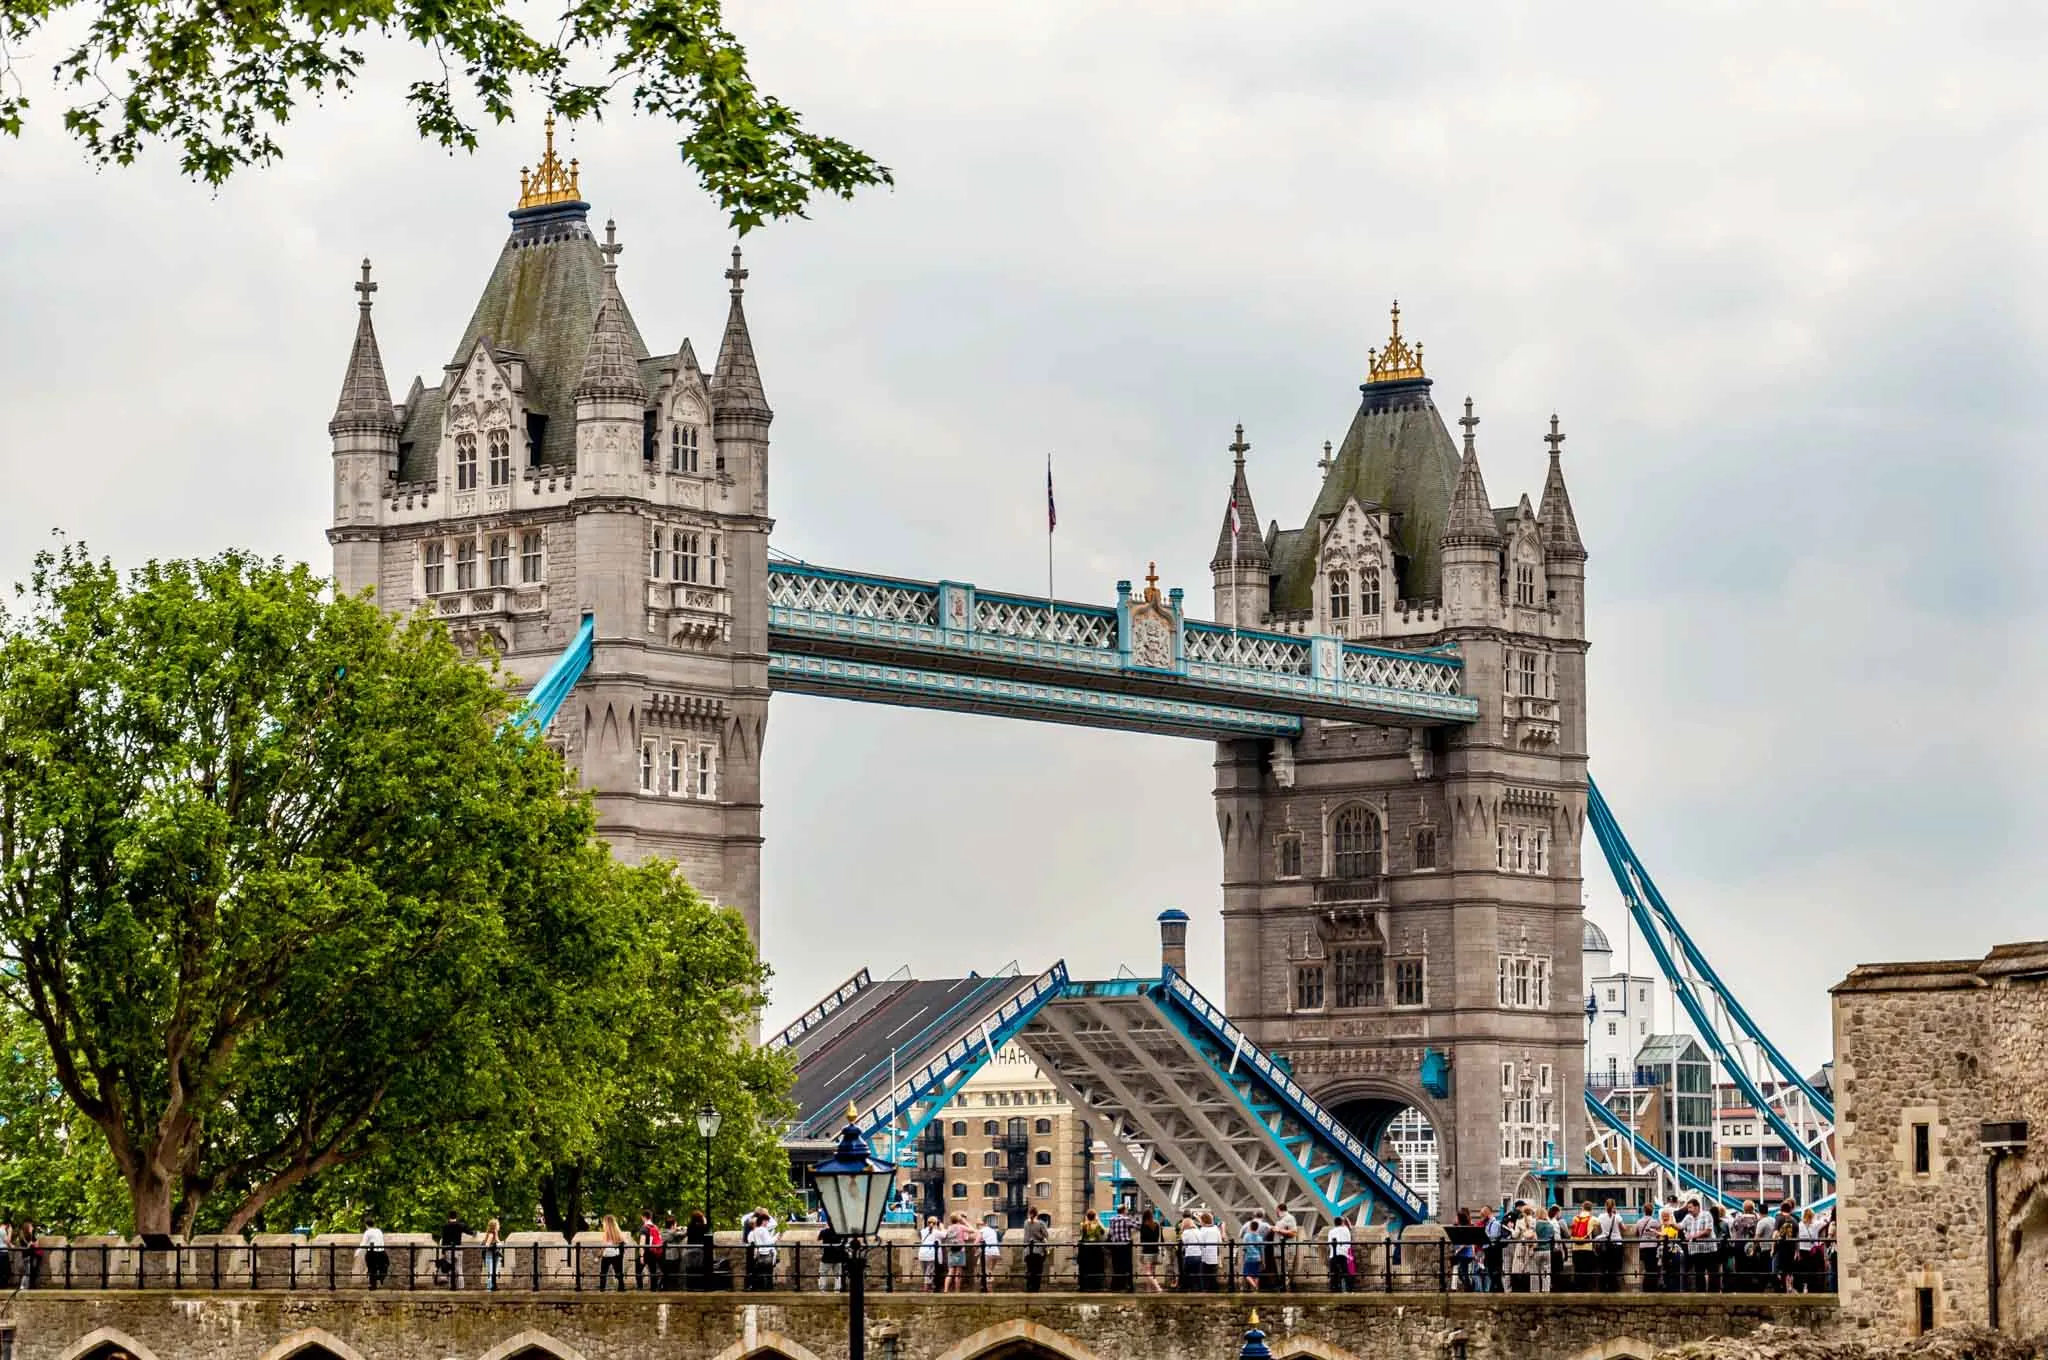 The Tower Bridge as viewed from the Tower of London - the final stop on your Heathrow Layover itinerary.